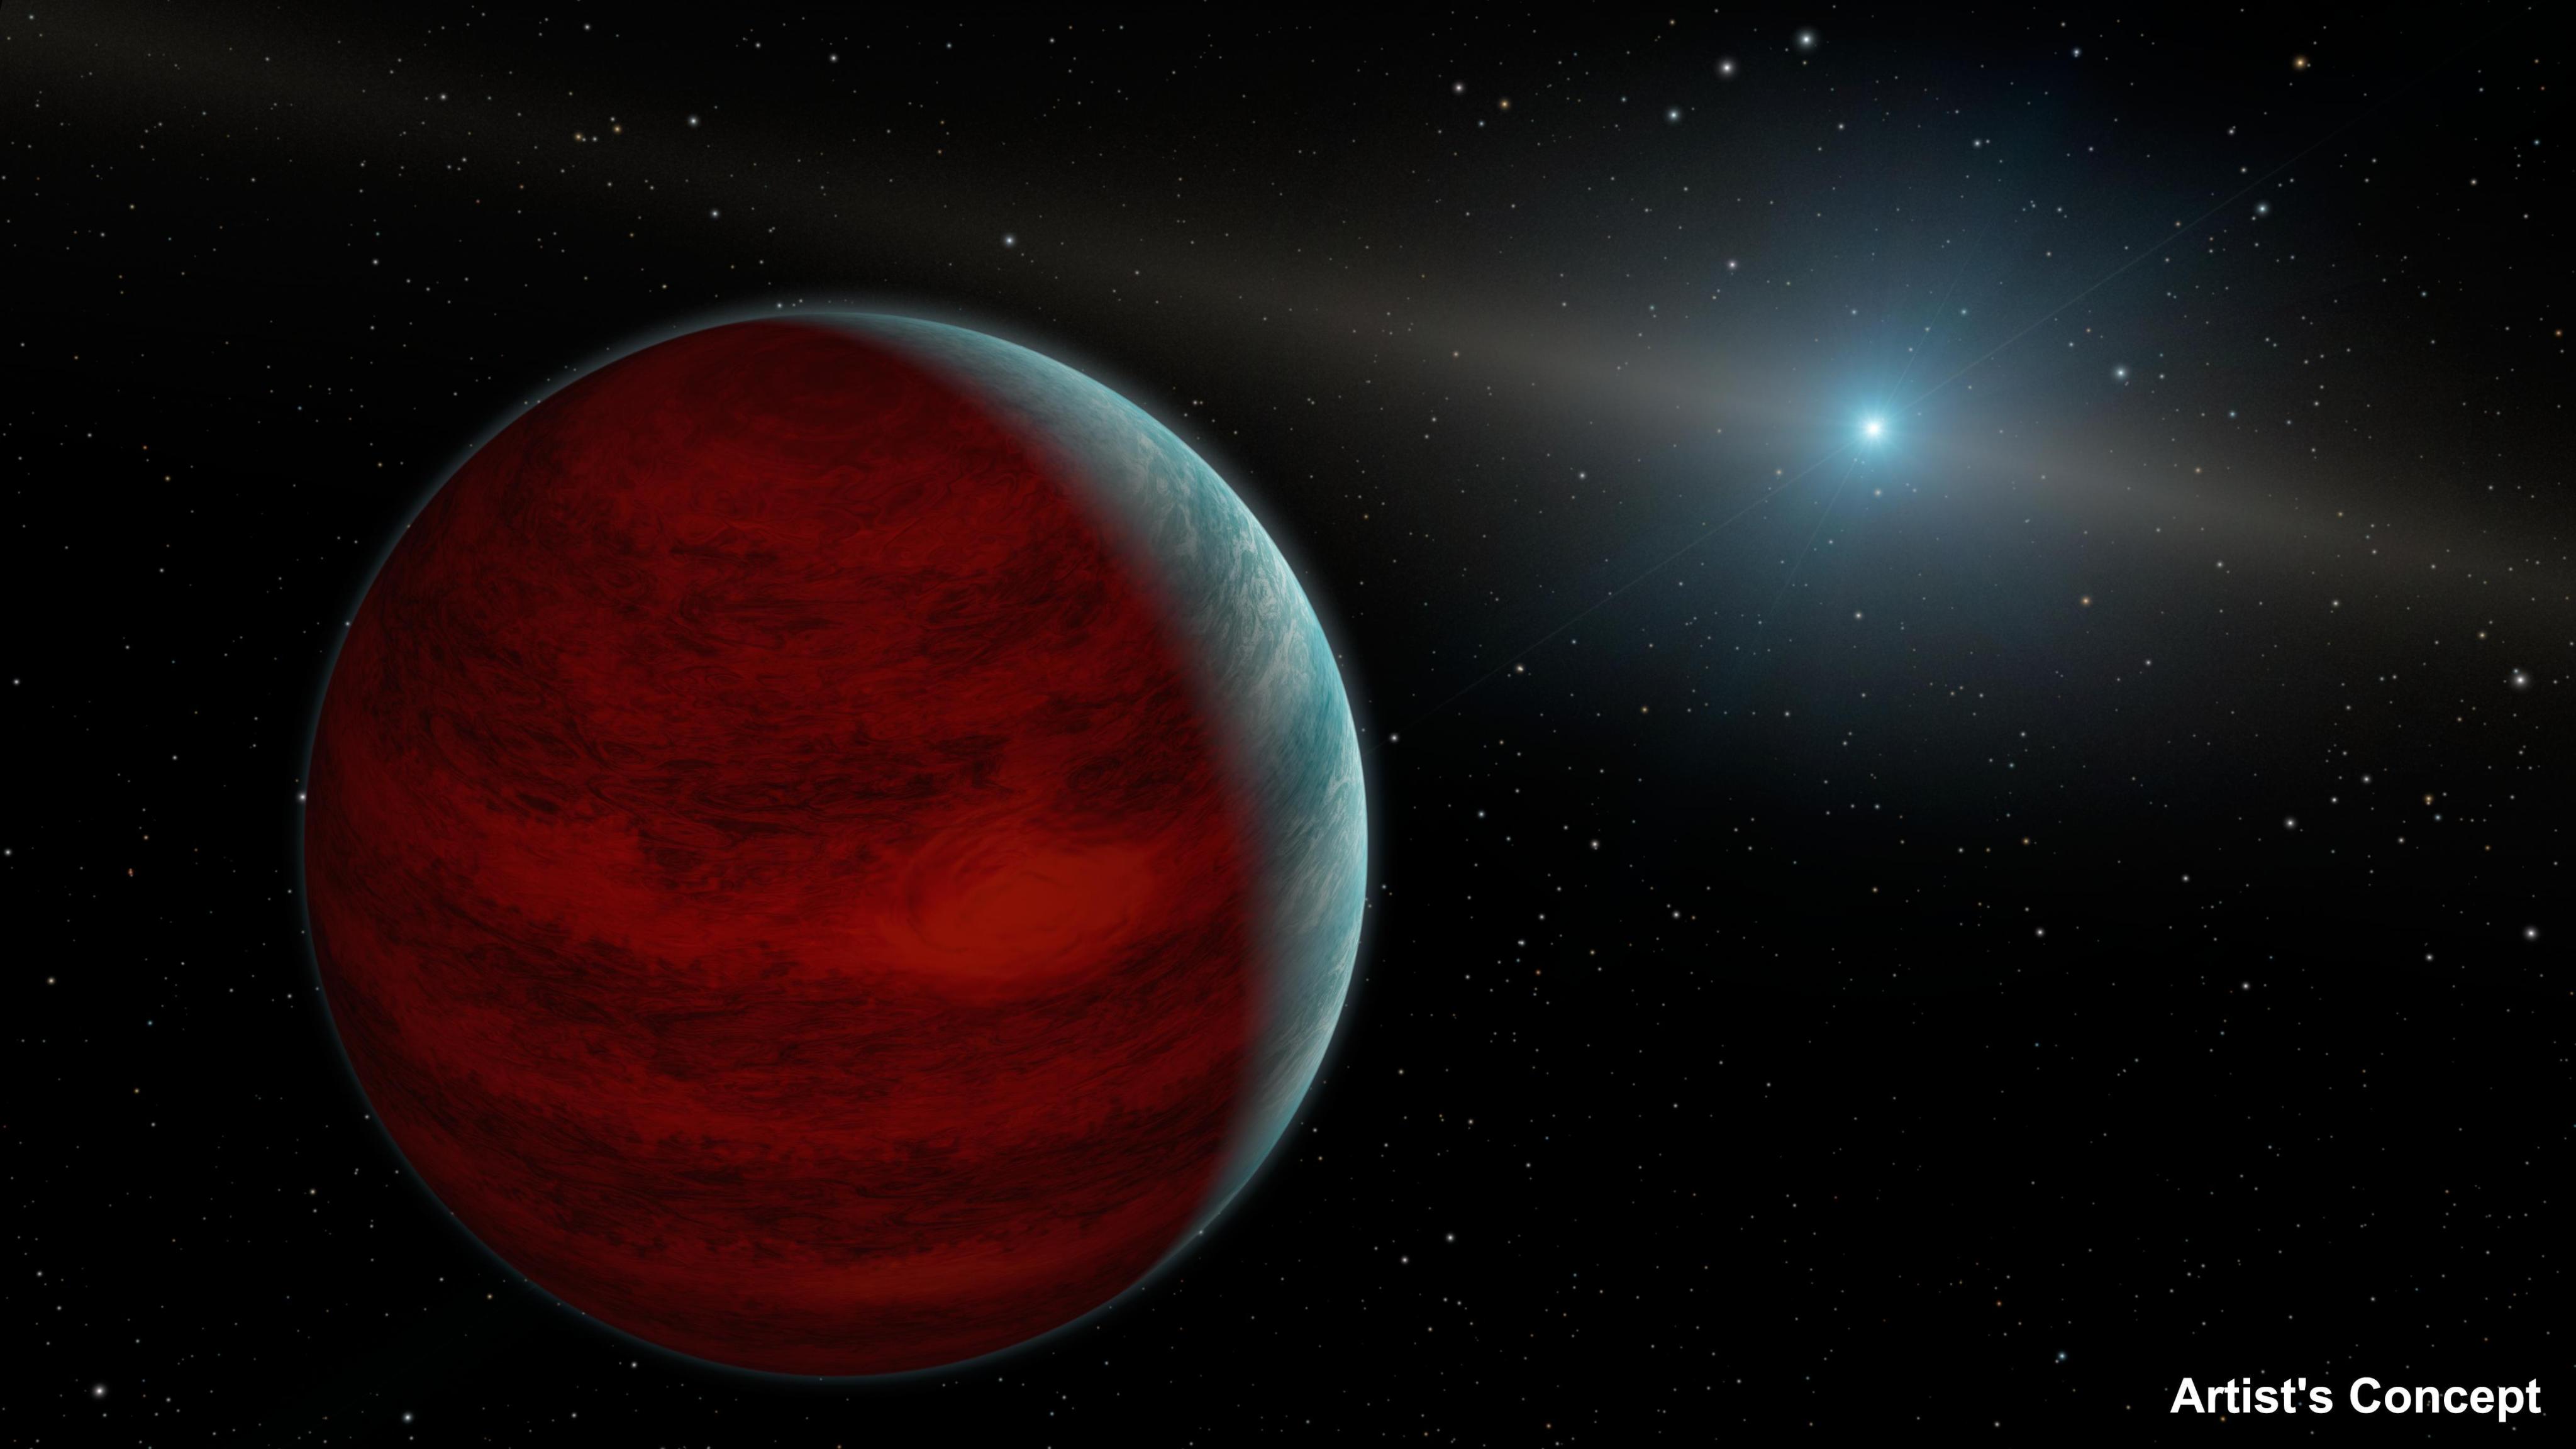 This artist's concept shows a hypothetical "rejuvenated" planet -- a gas giant that has reclaimed its youthful infrared glow. NASA's Spitzer Space Telescope found tentative evidence for one such planet around a dead star, or white dwarf, called PG 0010+280 (depicted as white dot in illustration).